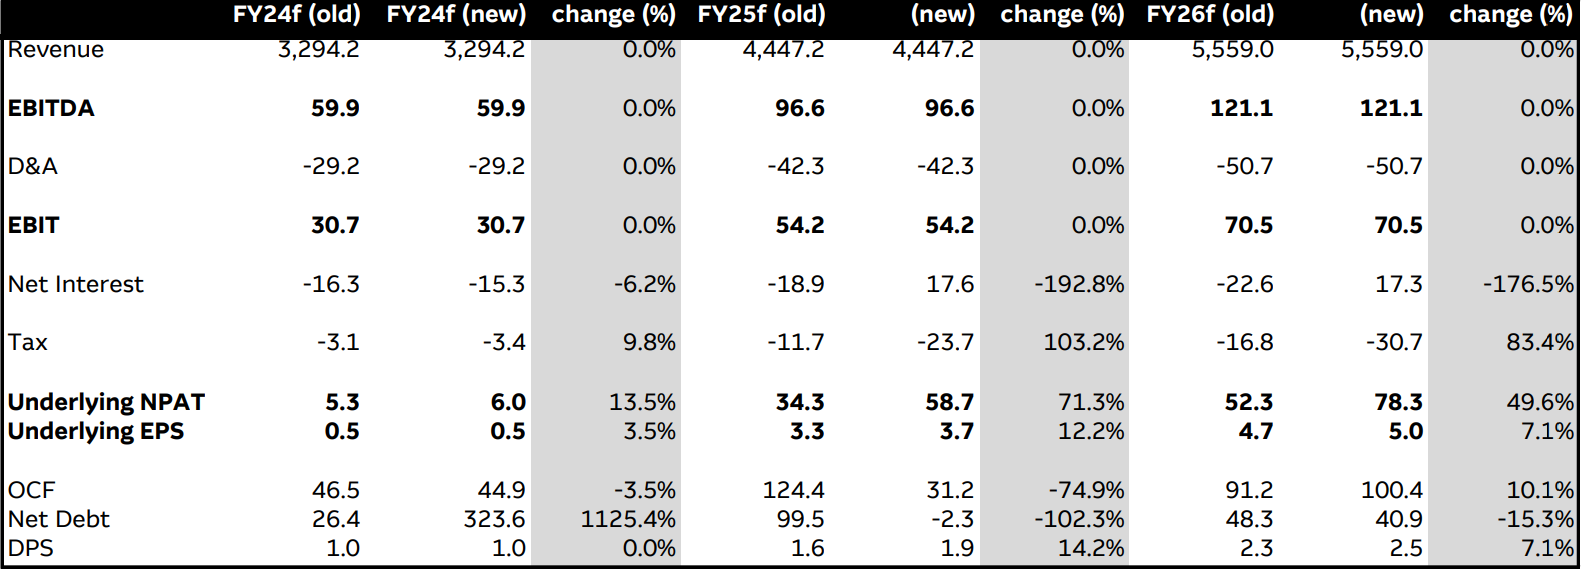 Summary of earnings changes. Source Company data, Macquarie Research, December 2023